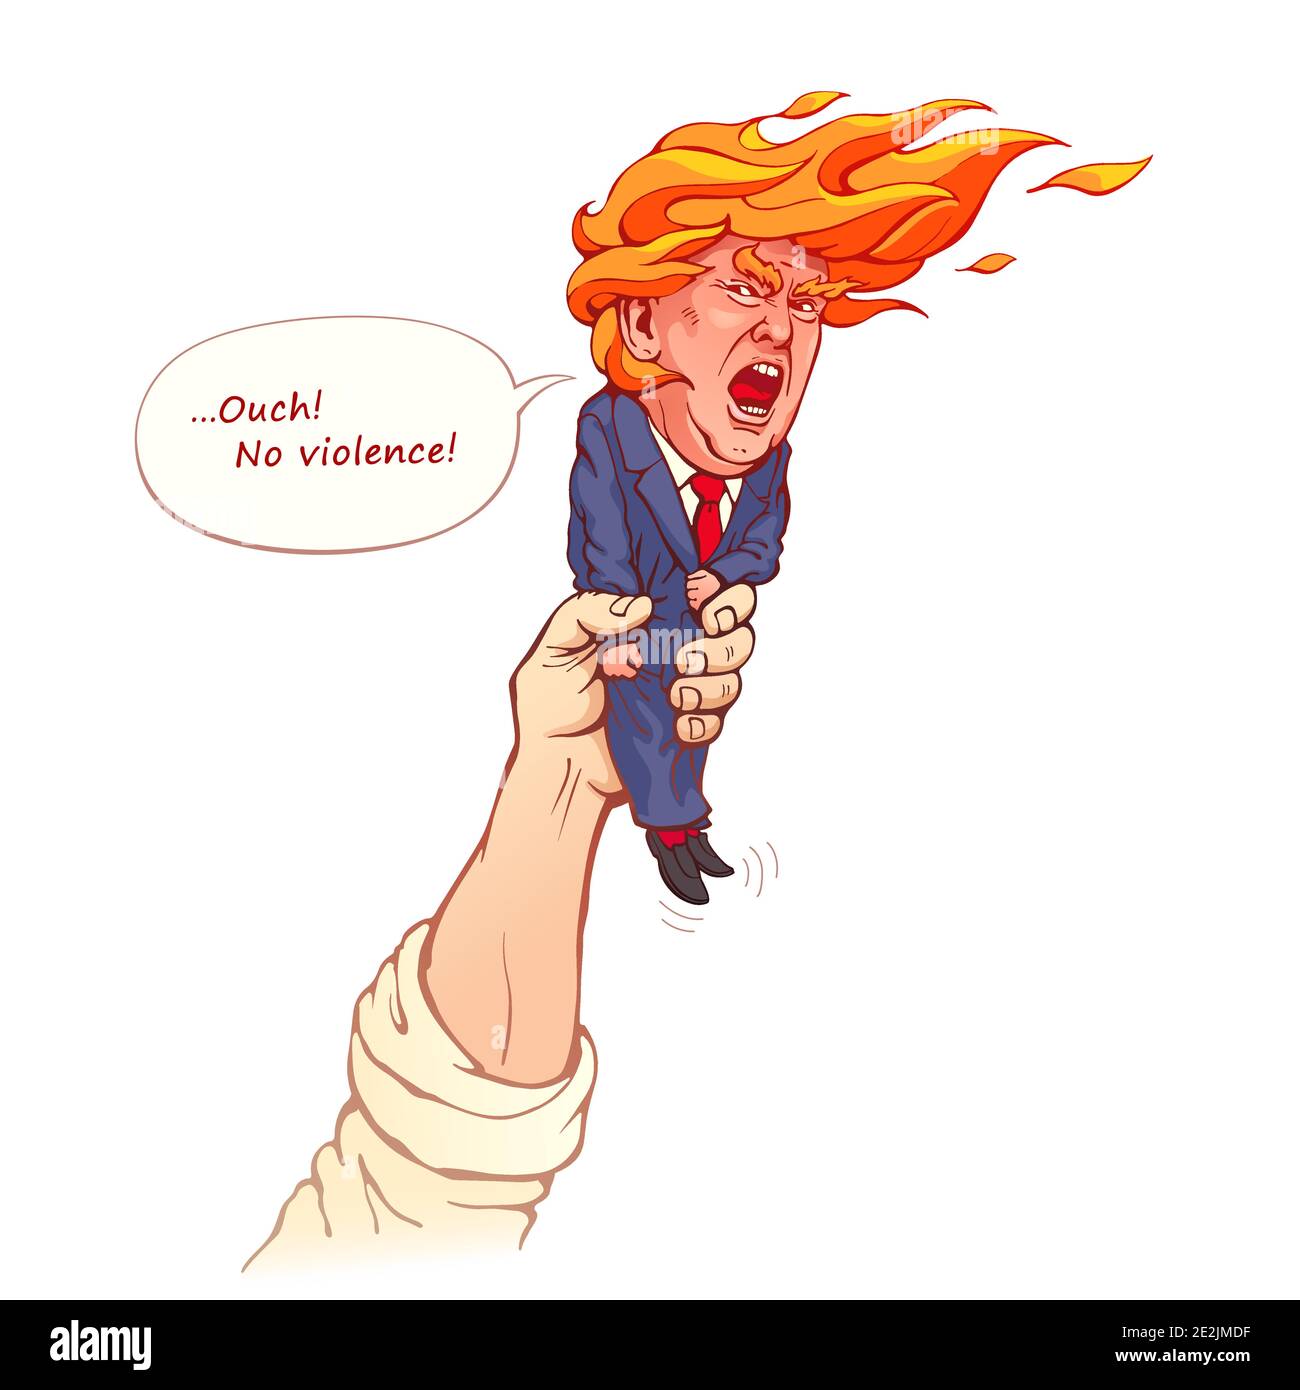 Donald Trump in the form of a flaming torch. Vector political caricature about provoking.Protester's hand holds a figurine of the former US president. Stock Vector